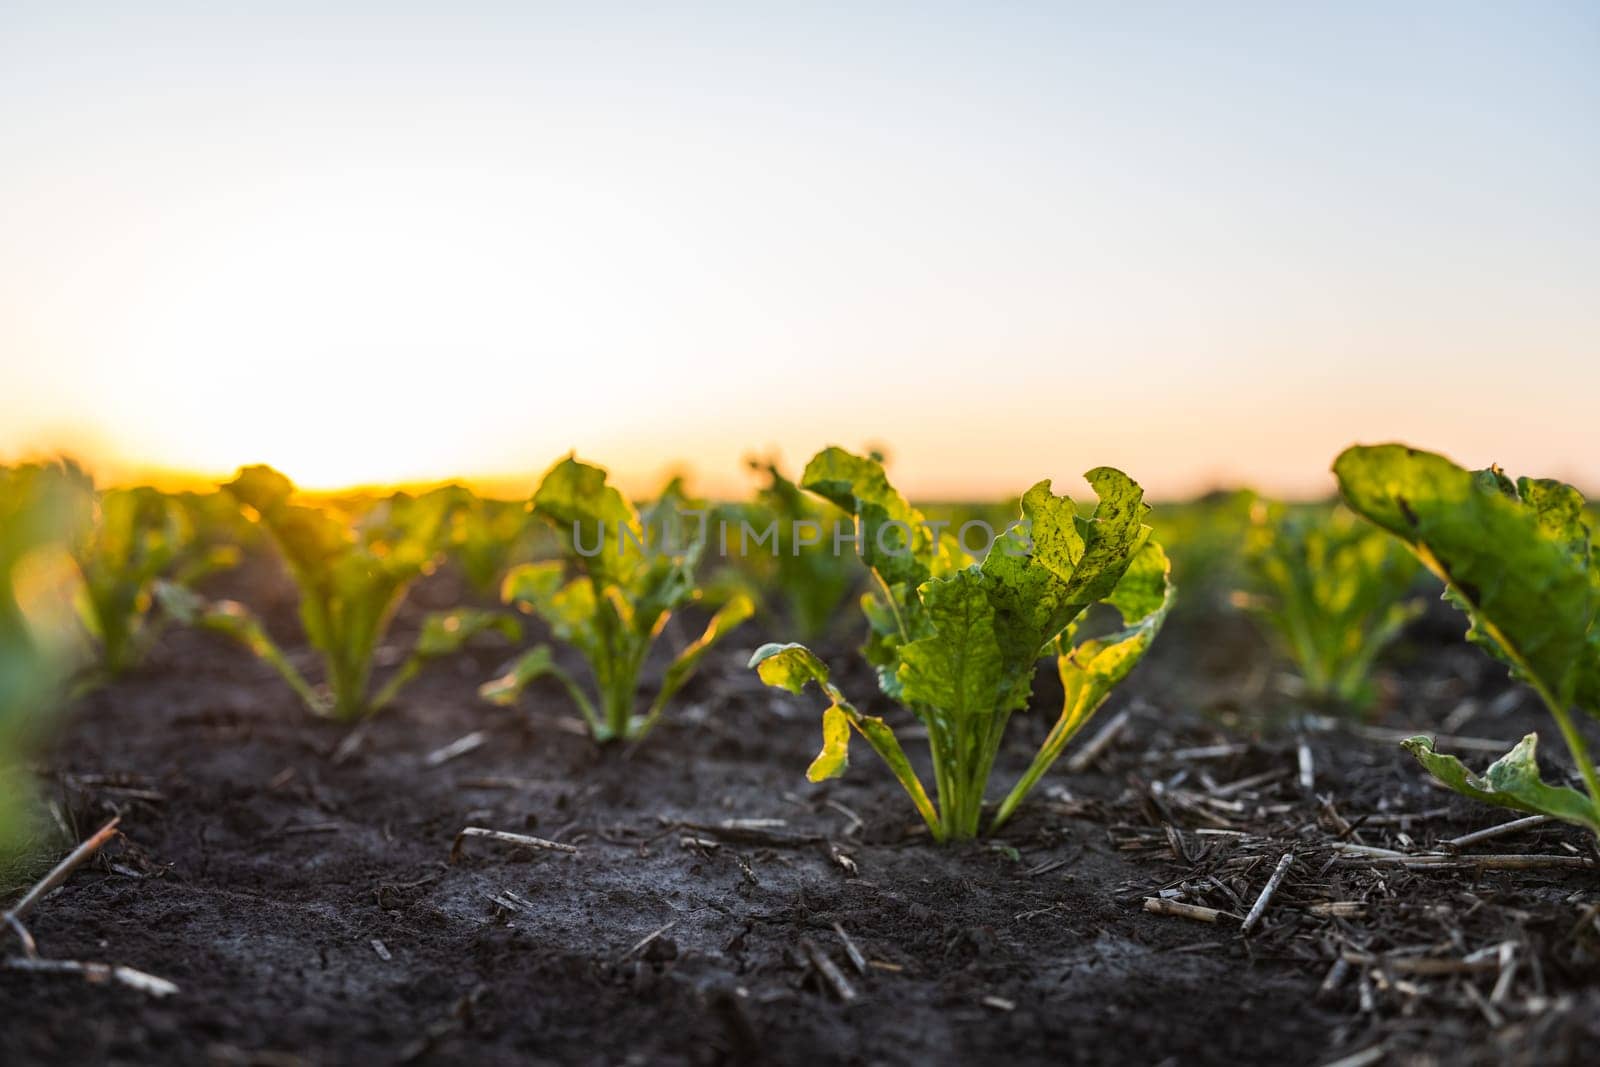 Beetroot plants growing in a fertile soil on a agricultural field. Cultivation of the sugar beet. Agriculture process